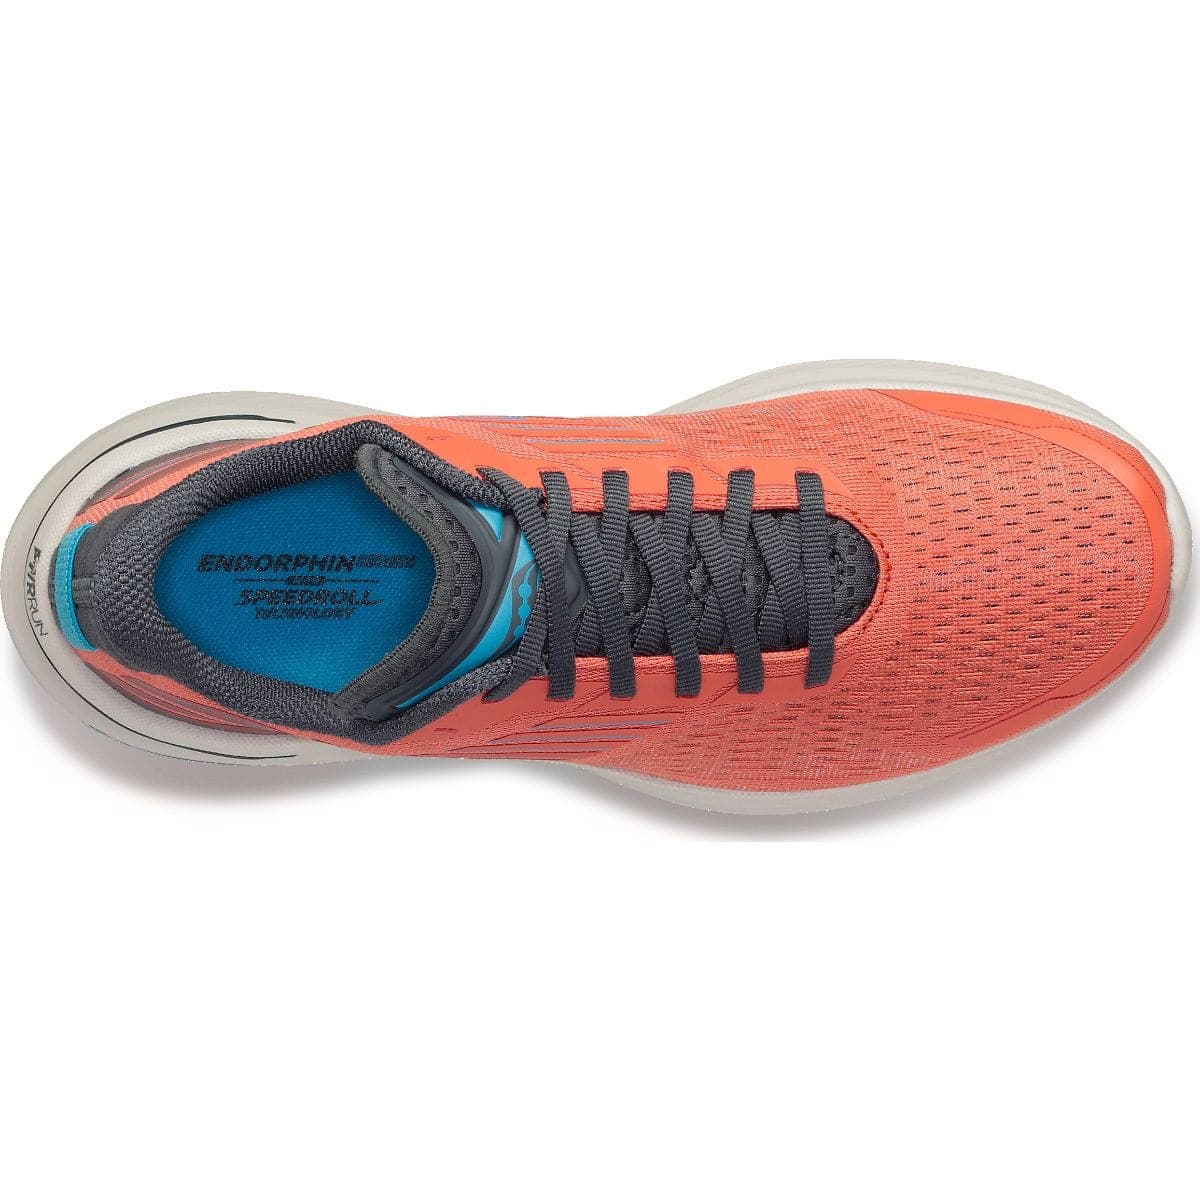 Saucony Endorphin Shift 3 (Womens) - Coral/Shadow